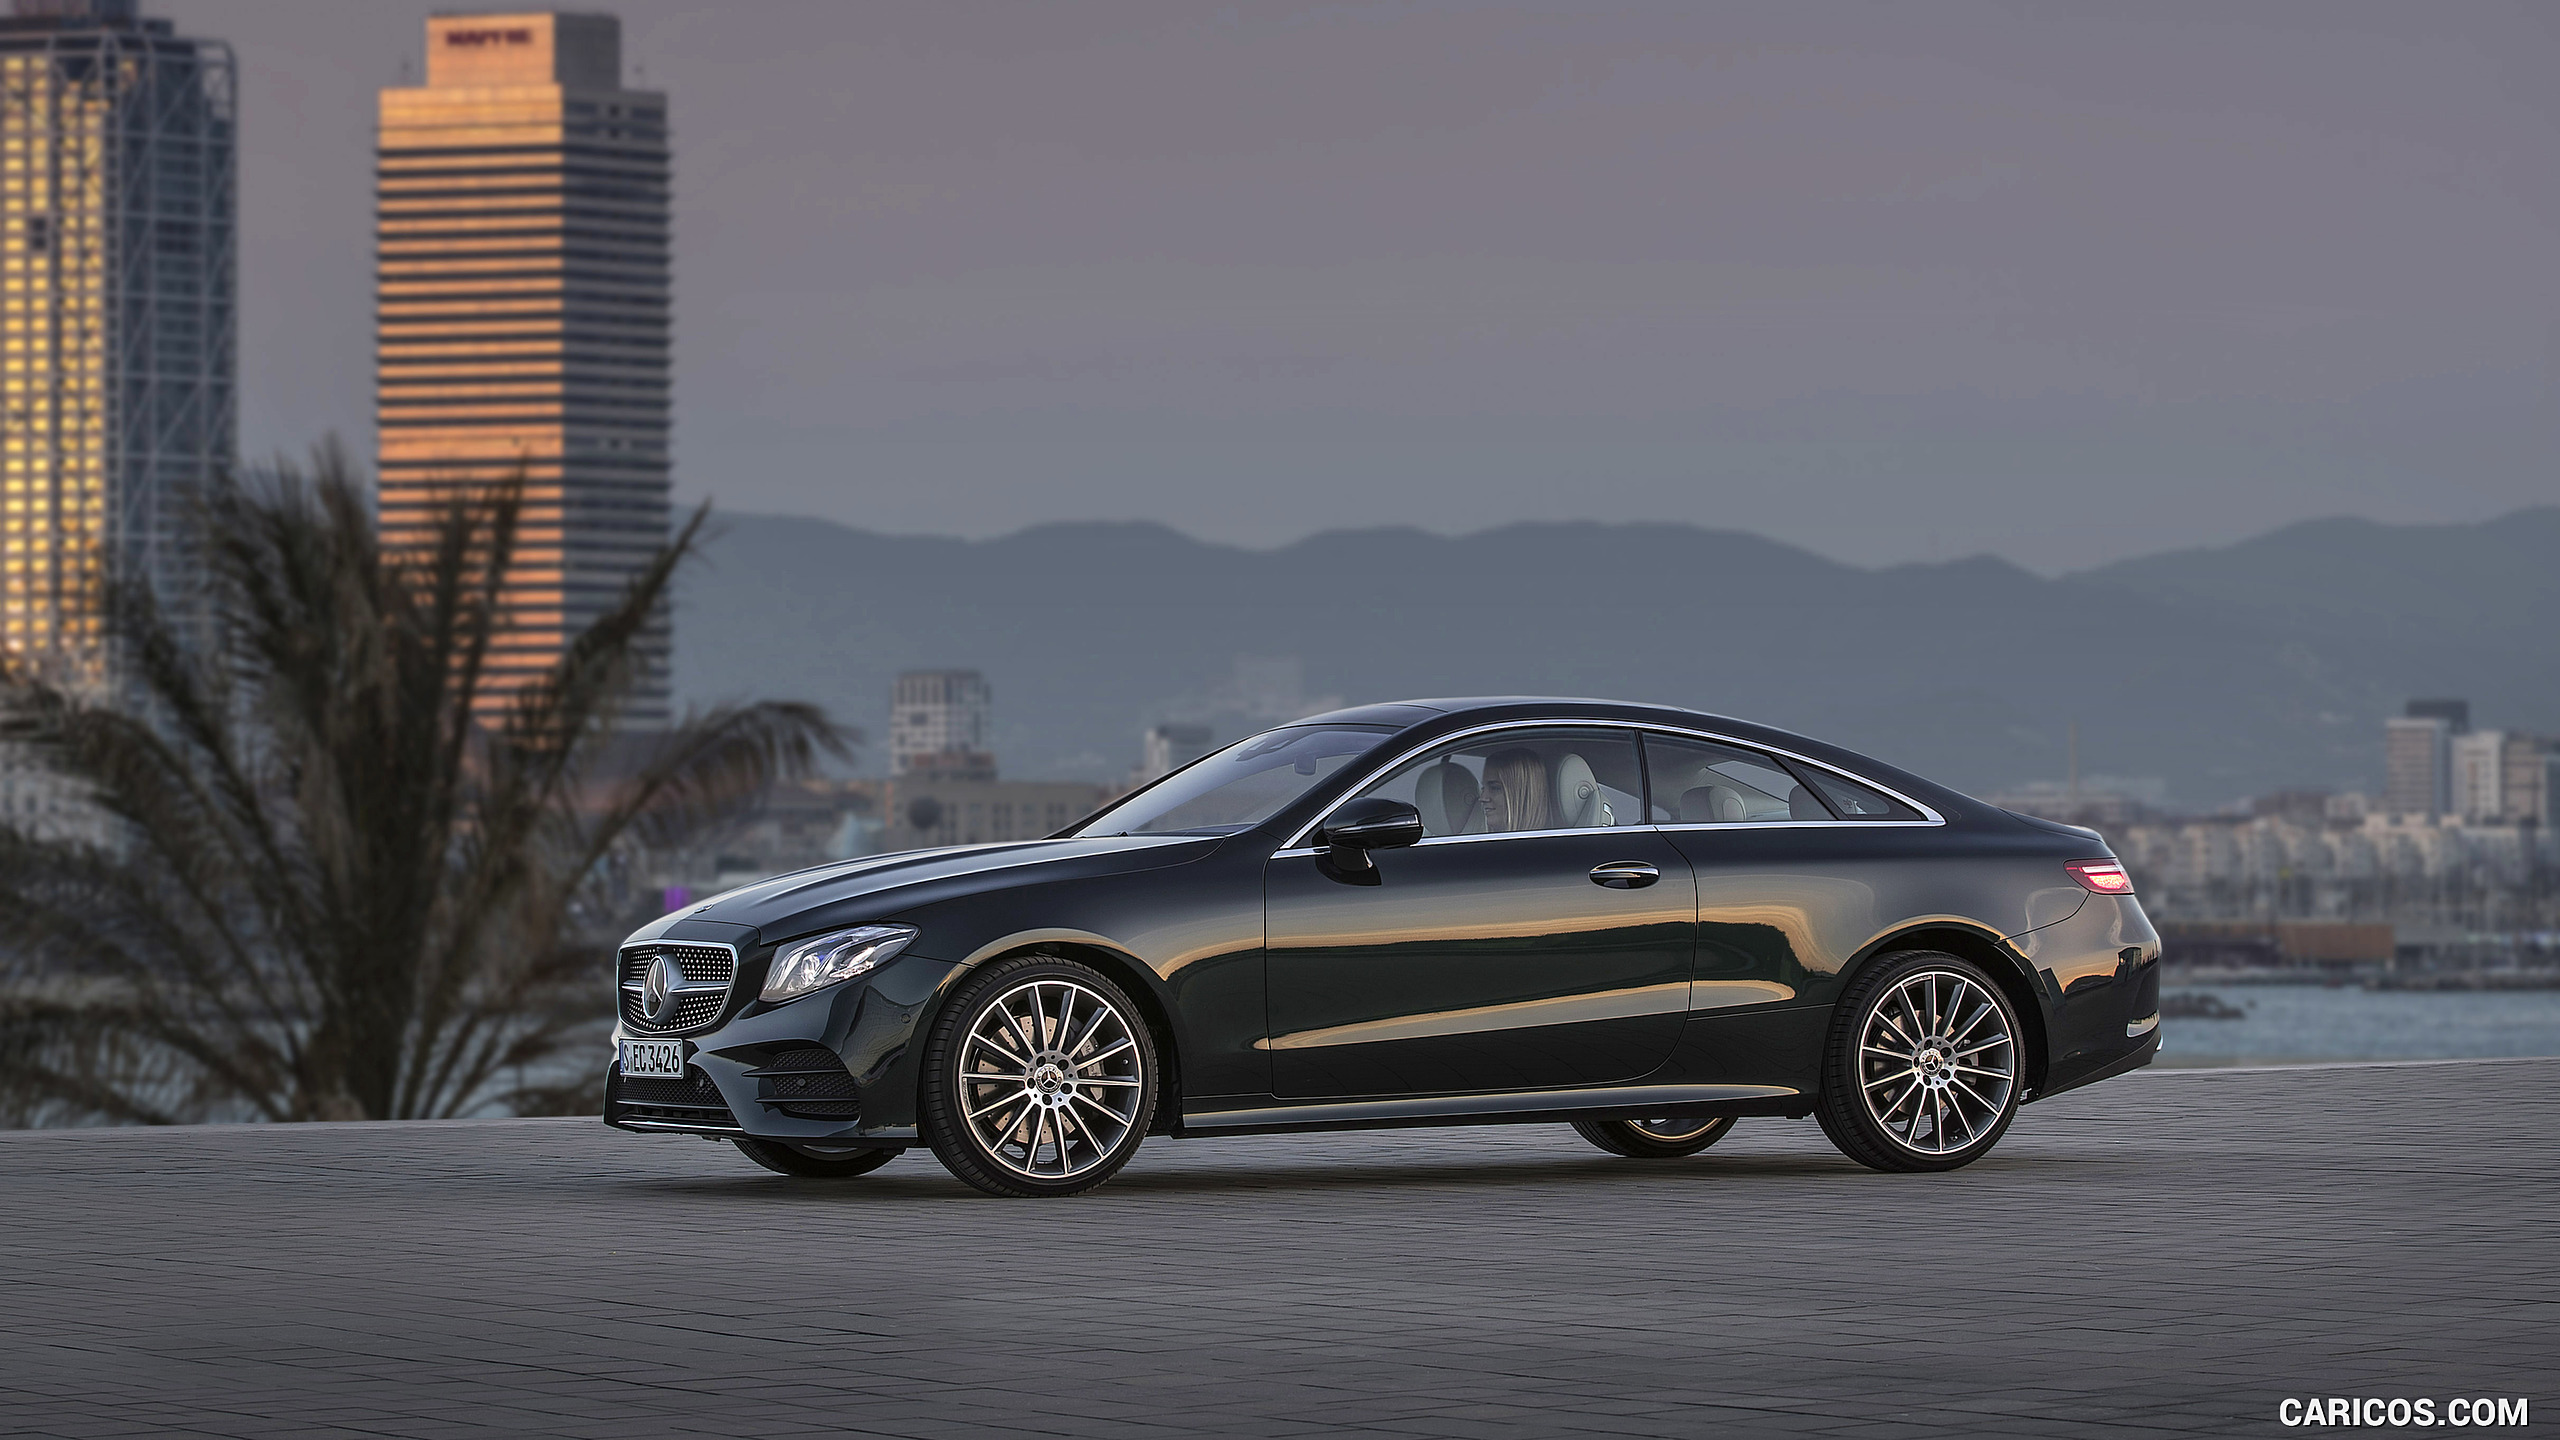 2018 Mercedes-Benz E400 Coupe 4MATIC - Side, #170 of 365